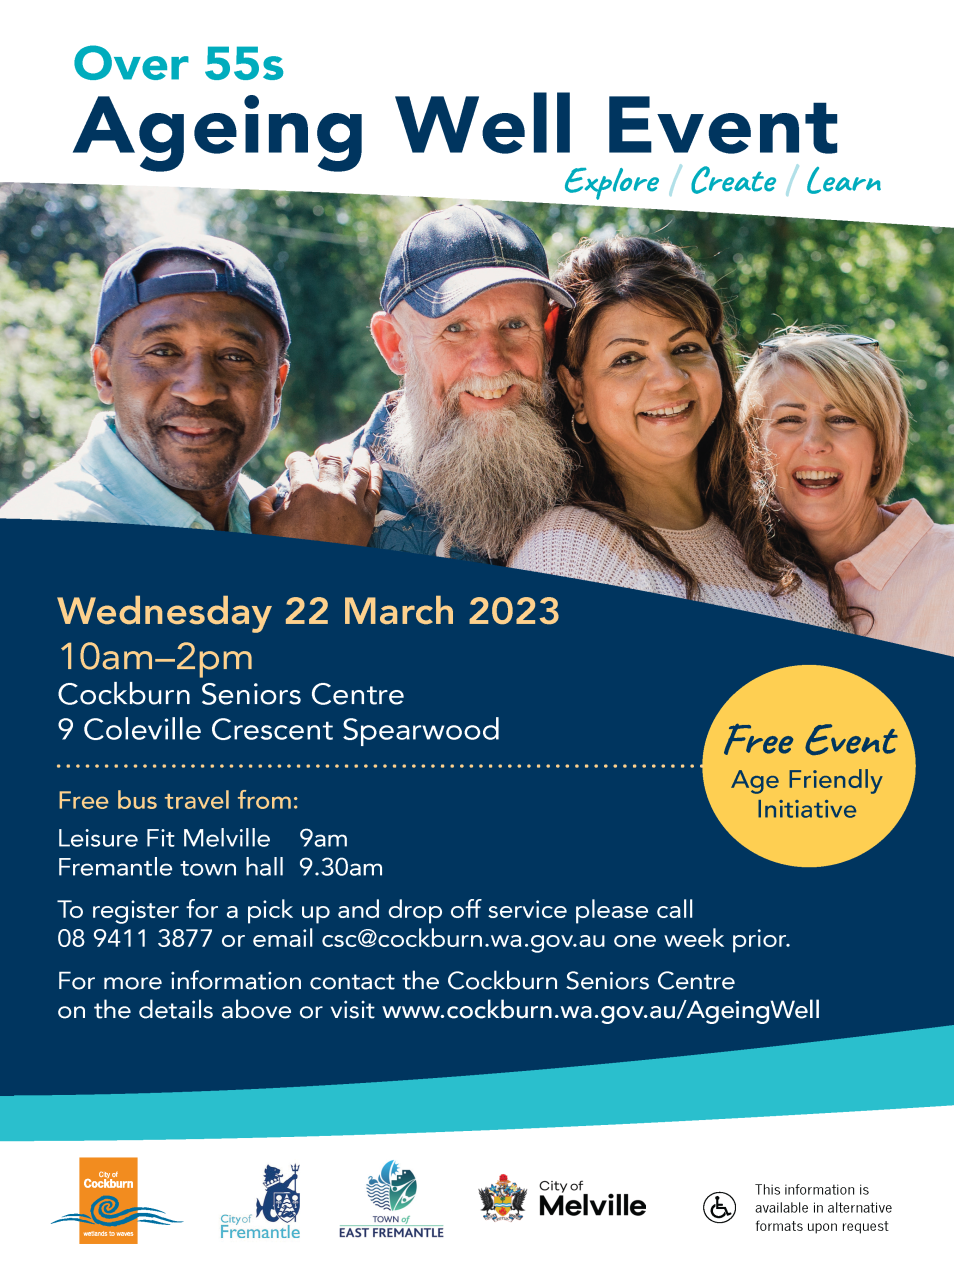 Over 55s Ageing Well Event